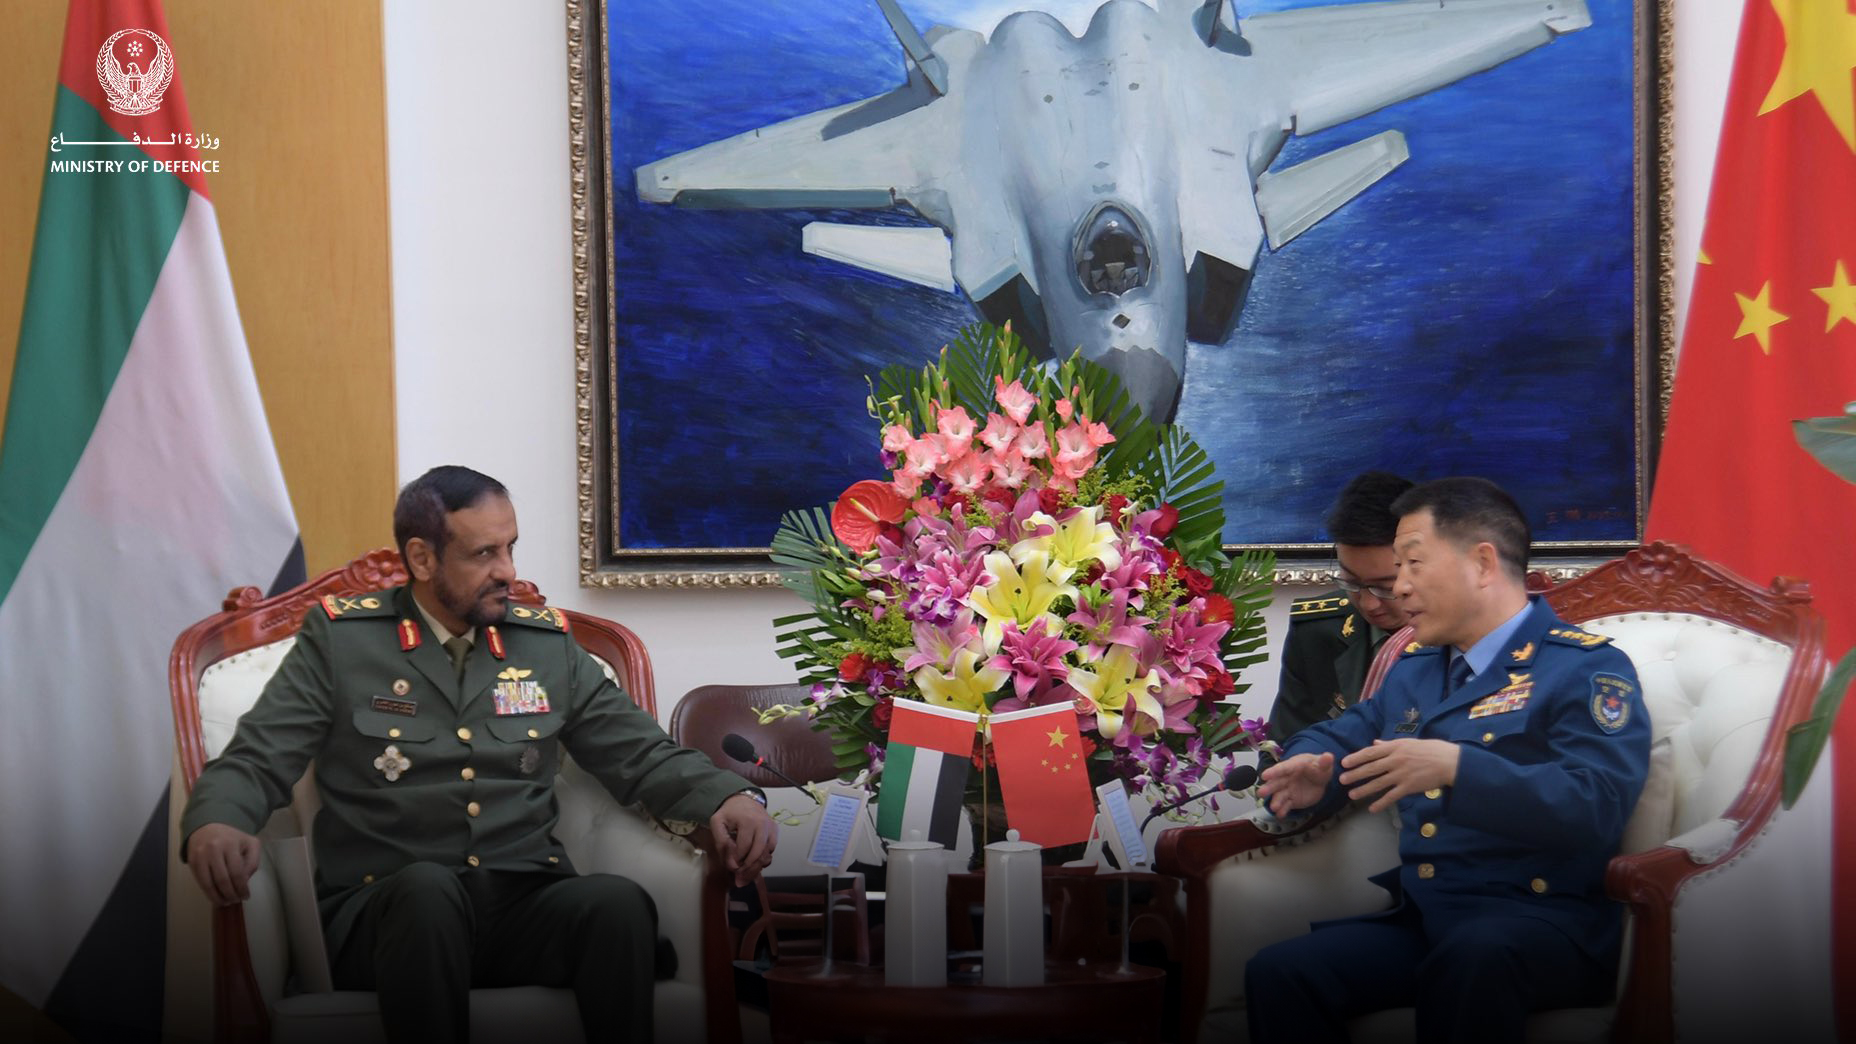 UAE And China Eye Military Cooperation With J-20 (Literally) In The Background